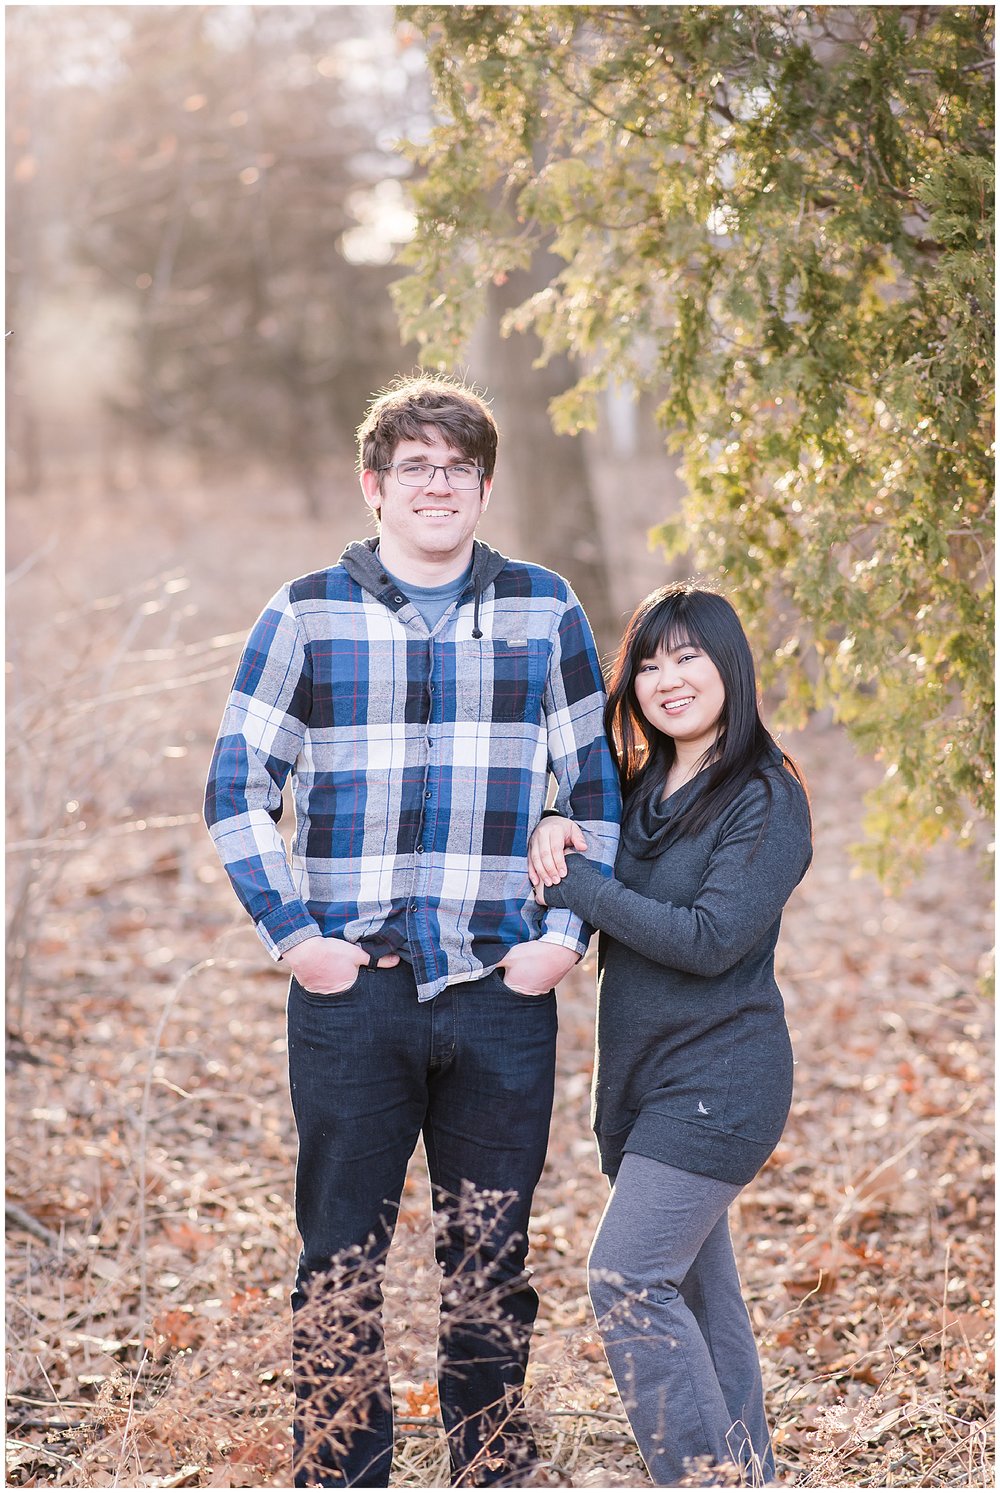 Fabyan Forest Preserve Engagement Photo